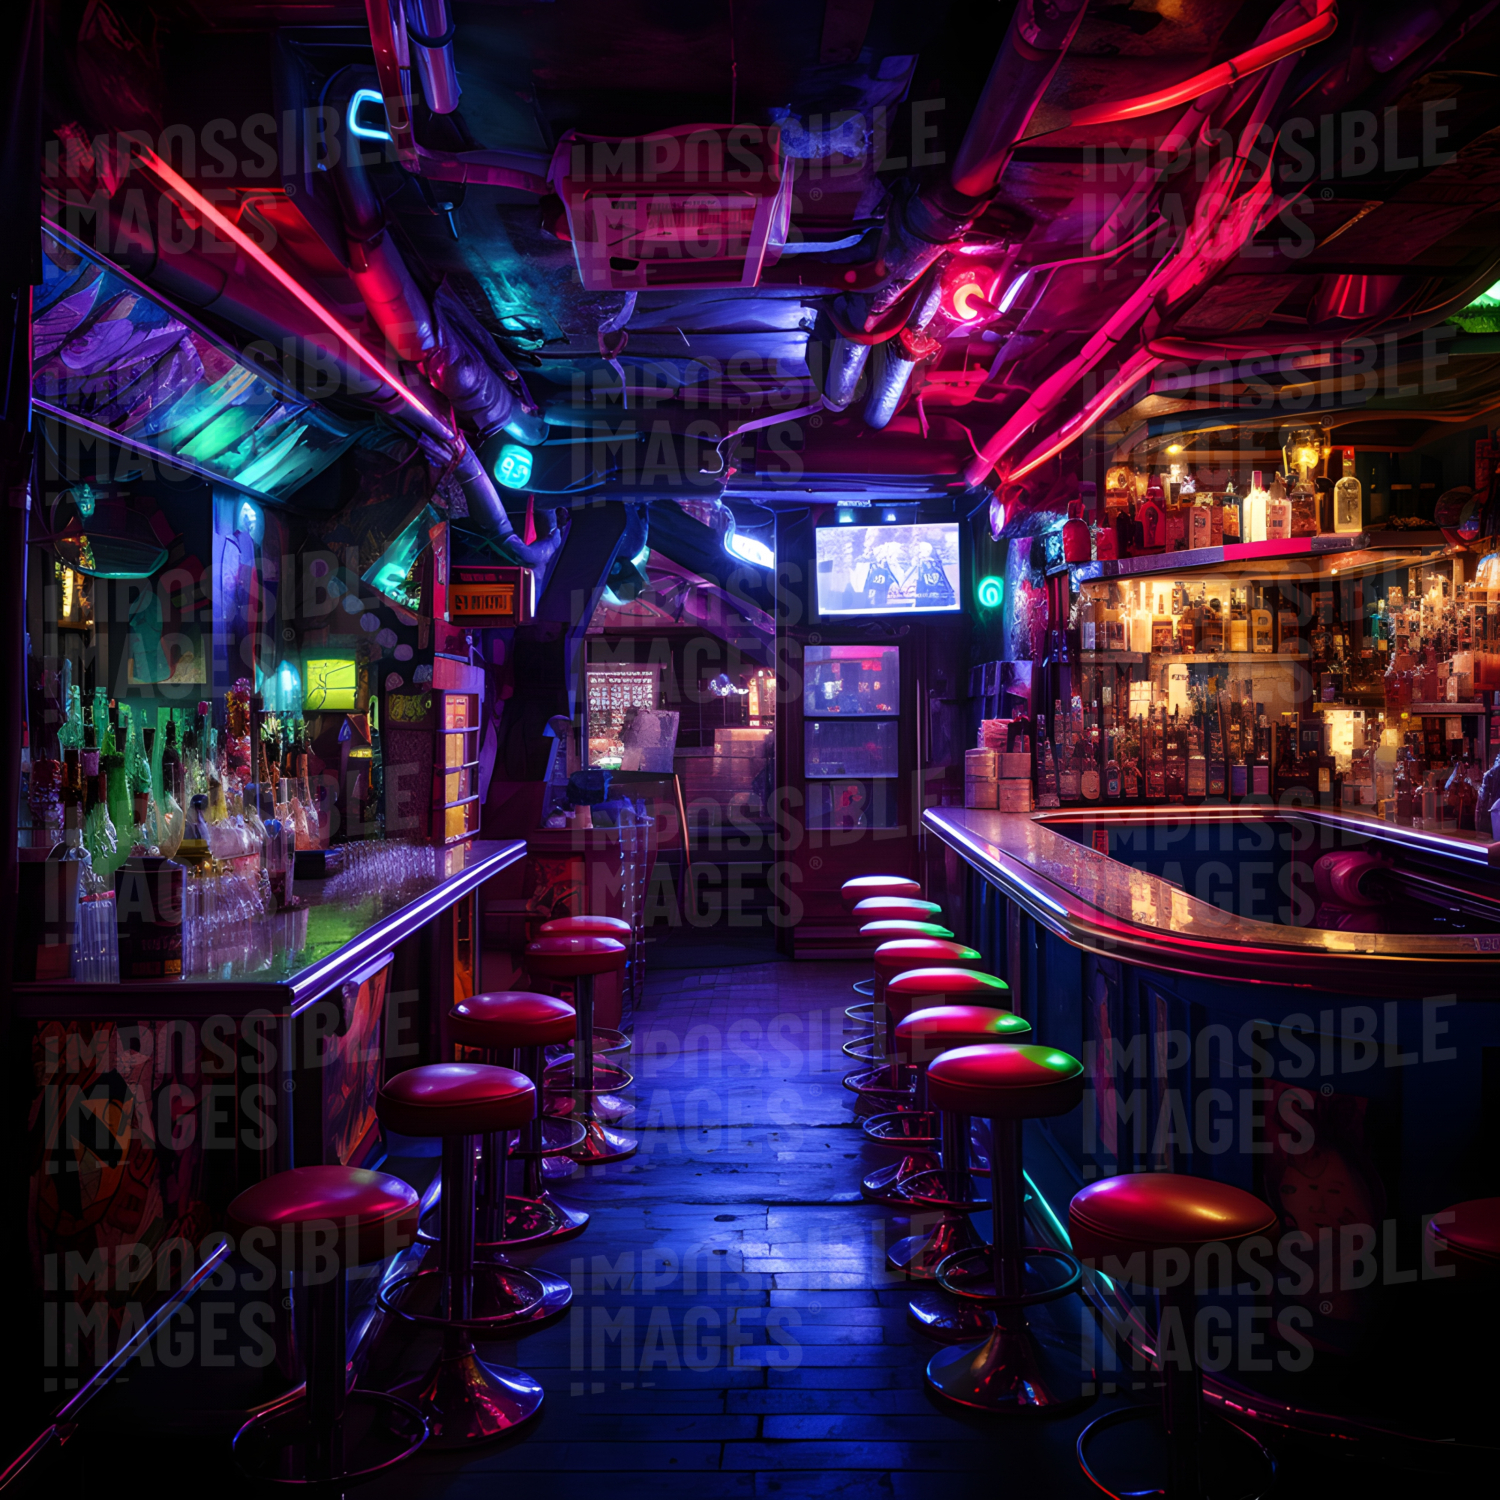 Futuristic dive bar -  A dive bar in the future, with neon lights, modern technology, and a unique atmosphere that will make you feel like you're in a different world.